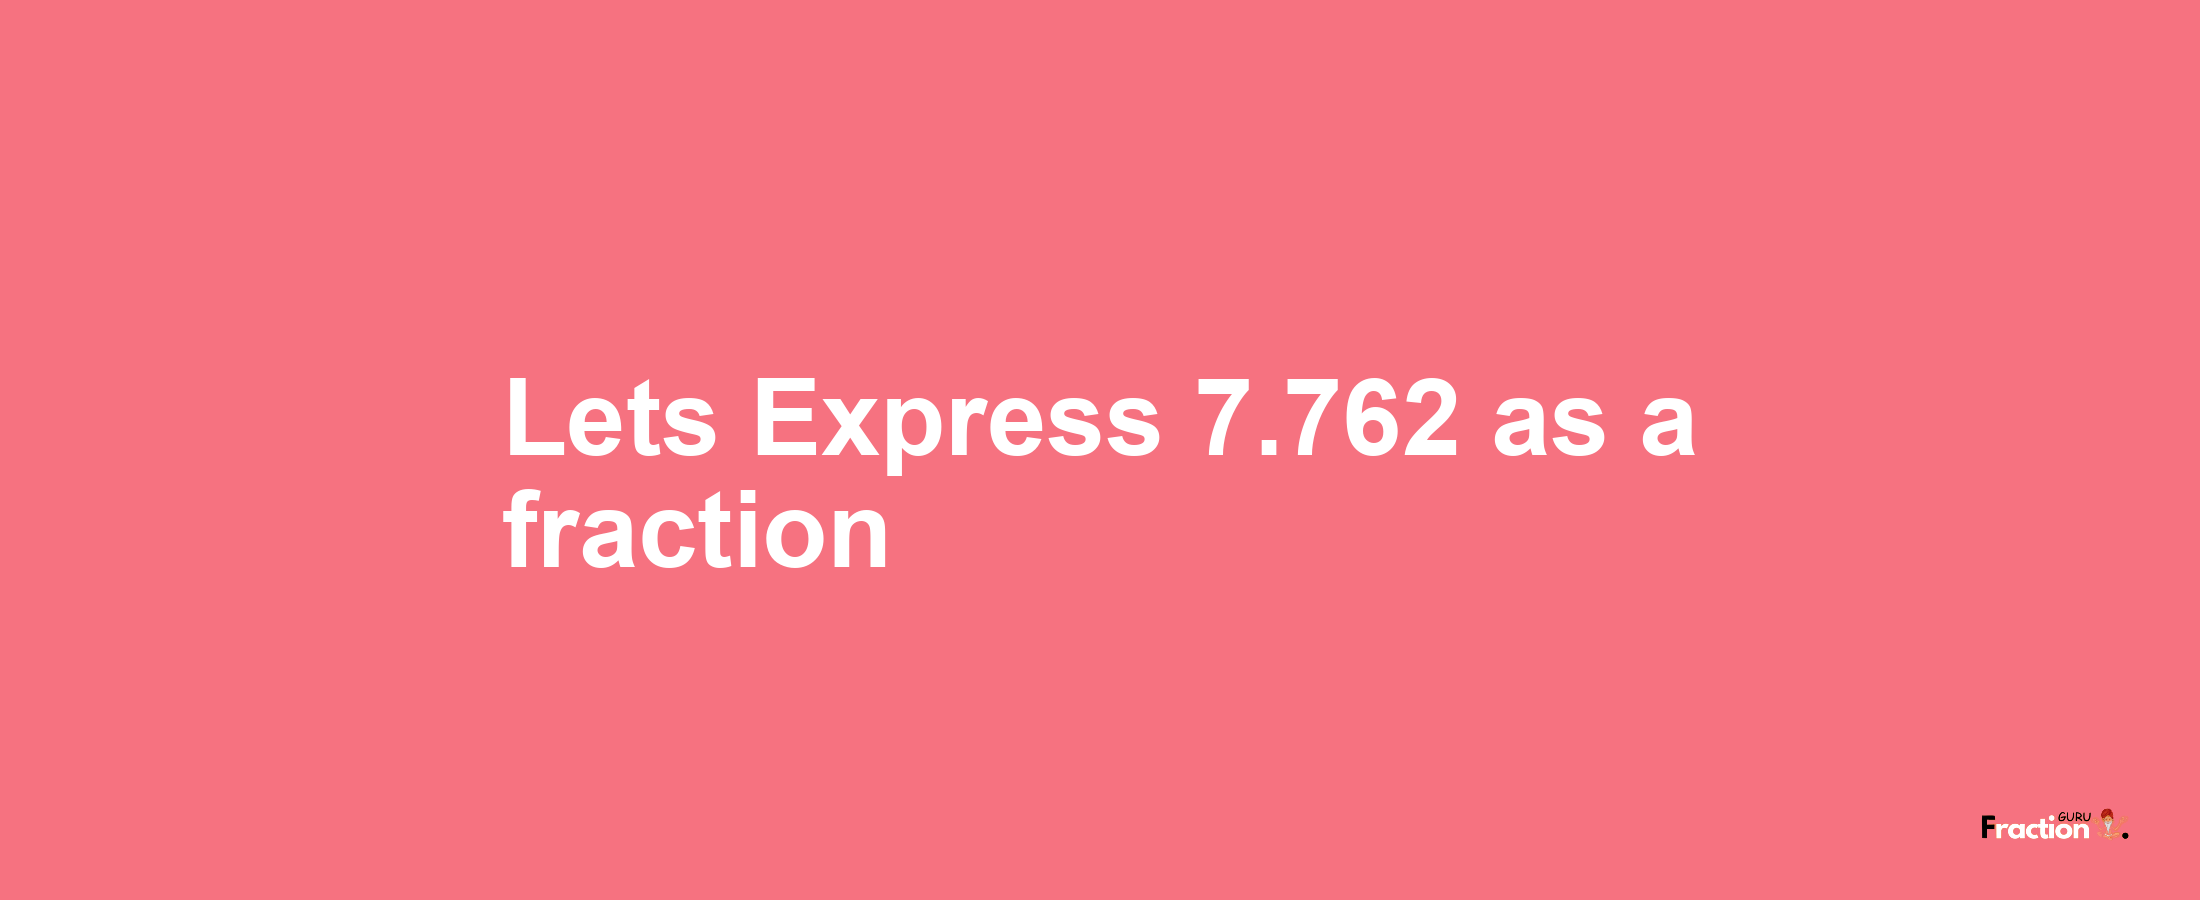 Lets Express 7.762 as afraction